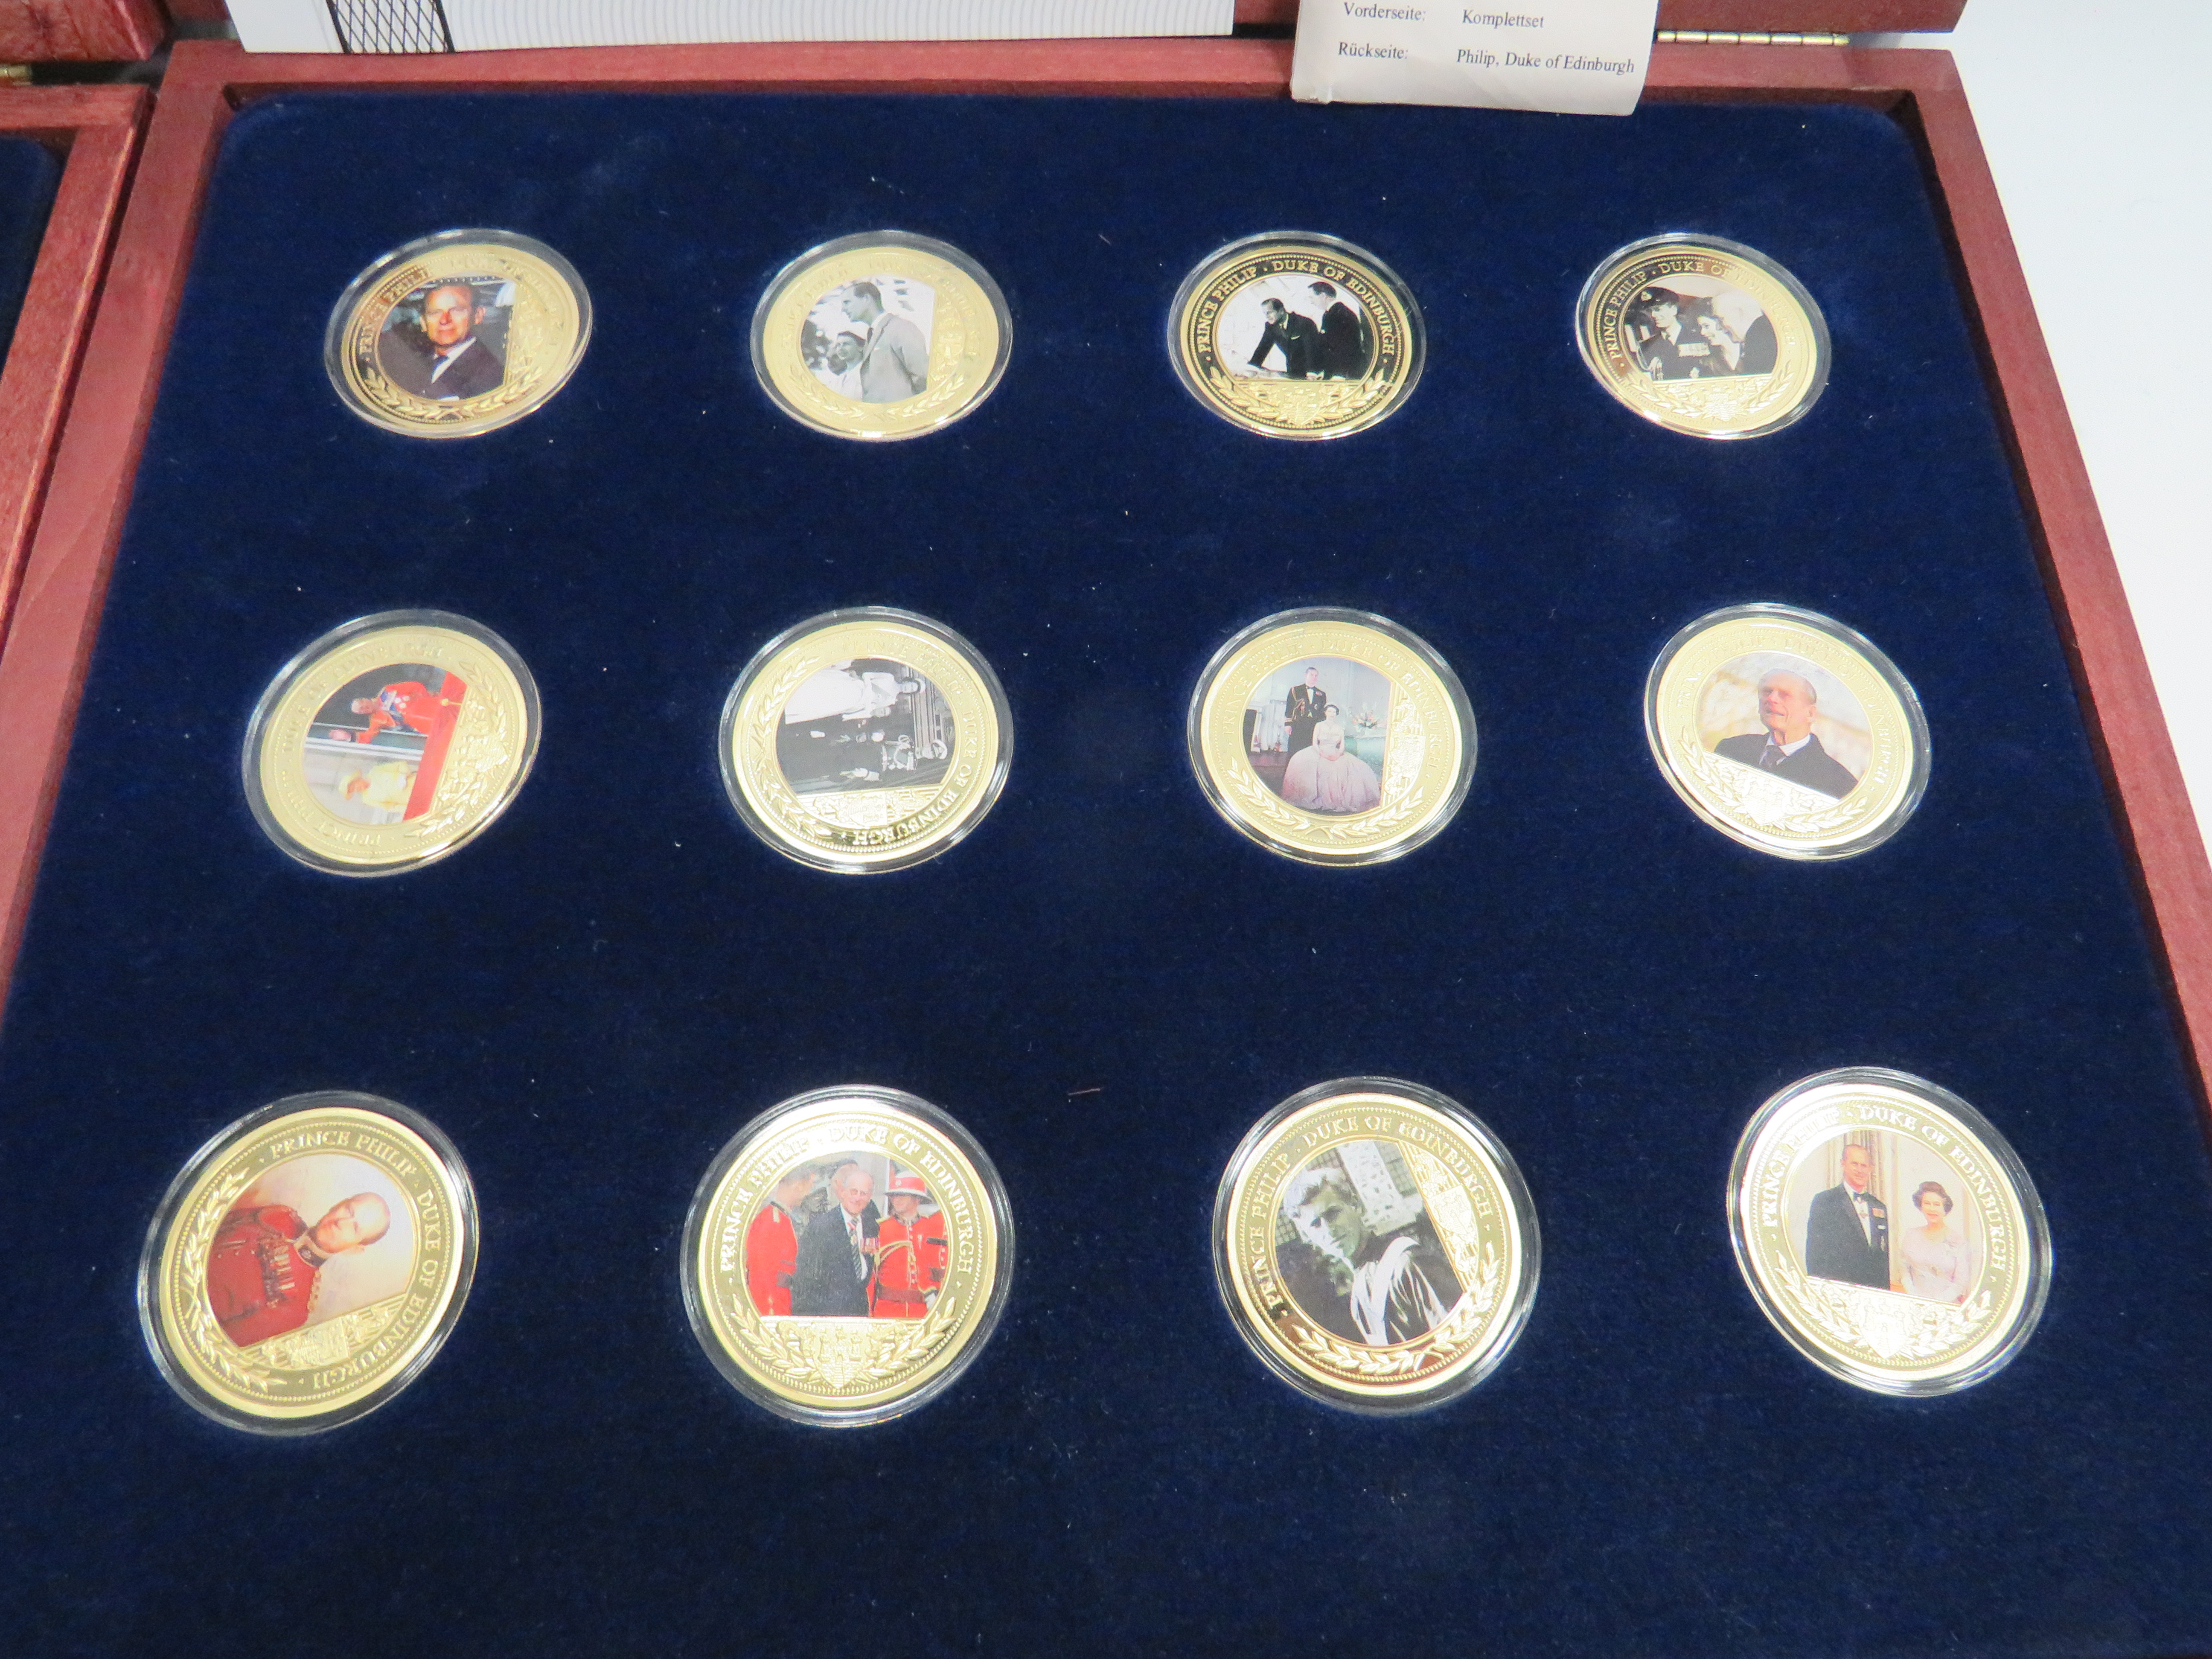 Cased Boxed Set of 24 ct Gold Plated Coins of the Life of Queen Elizabeth plus 12 more commemorating - Image 4 of 7